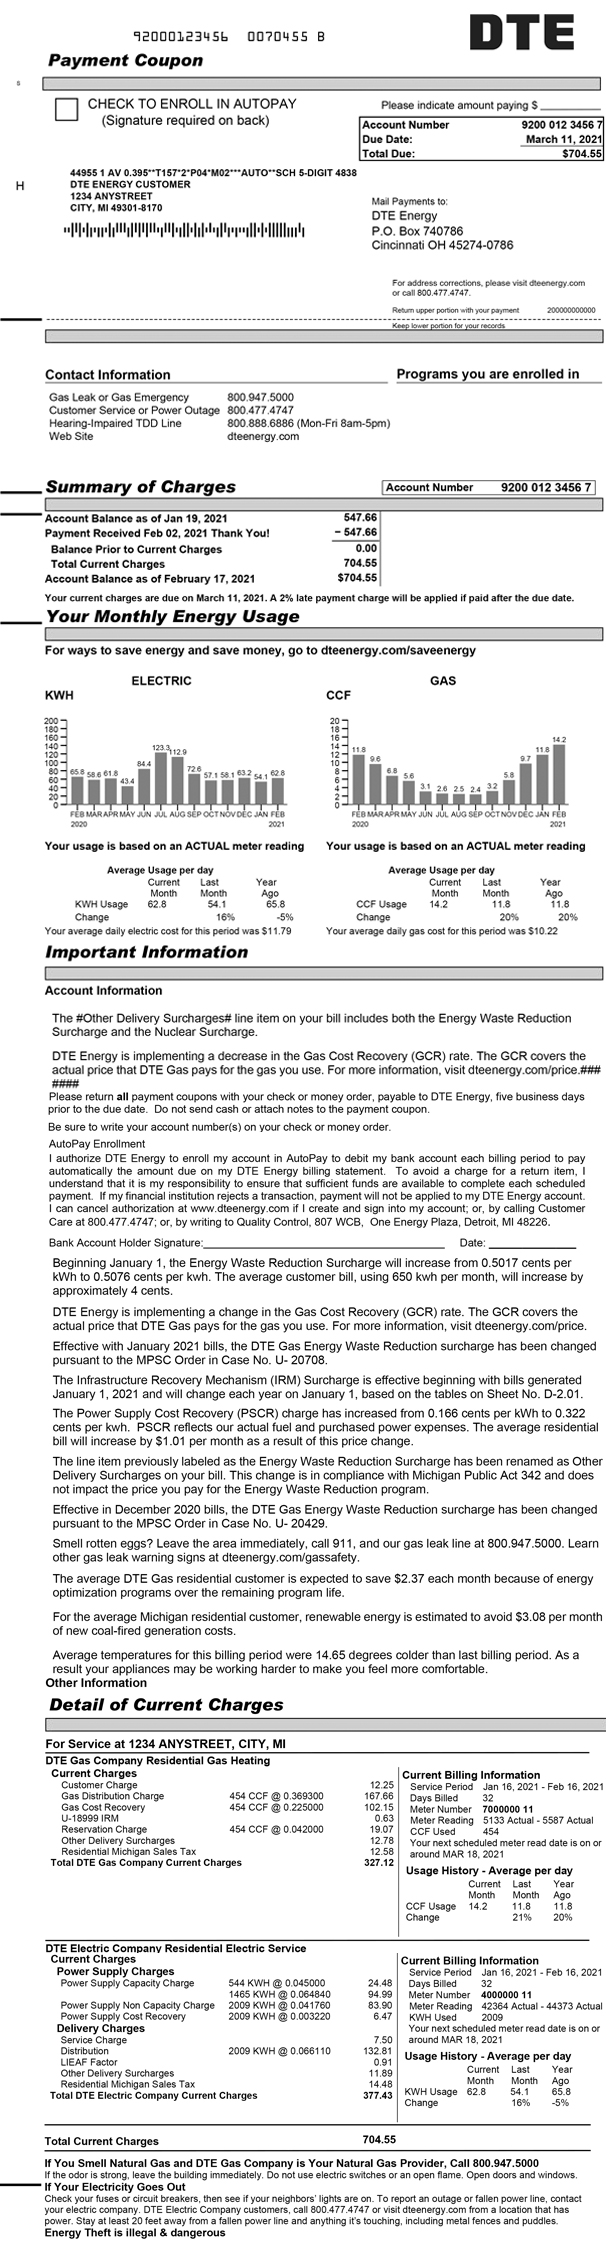 Electric and Natural Gas Bill